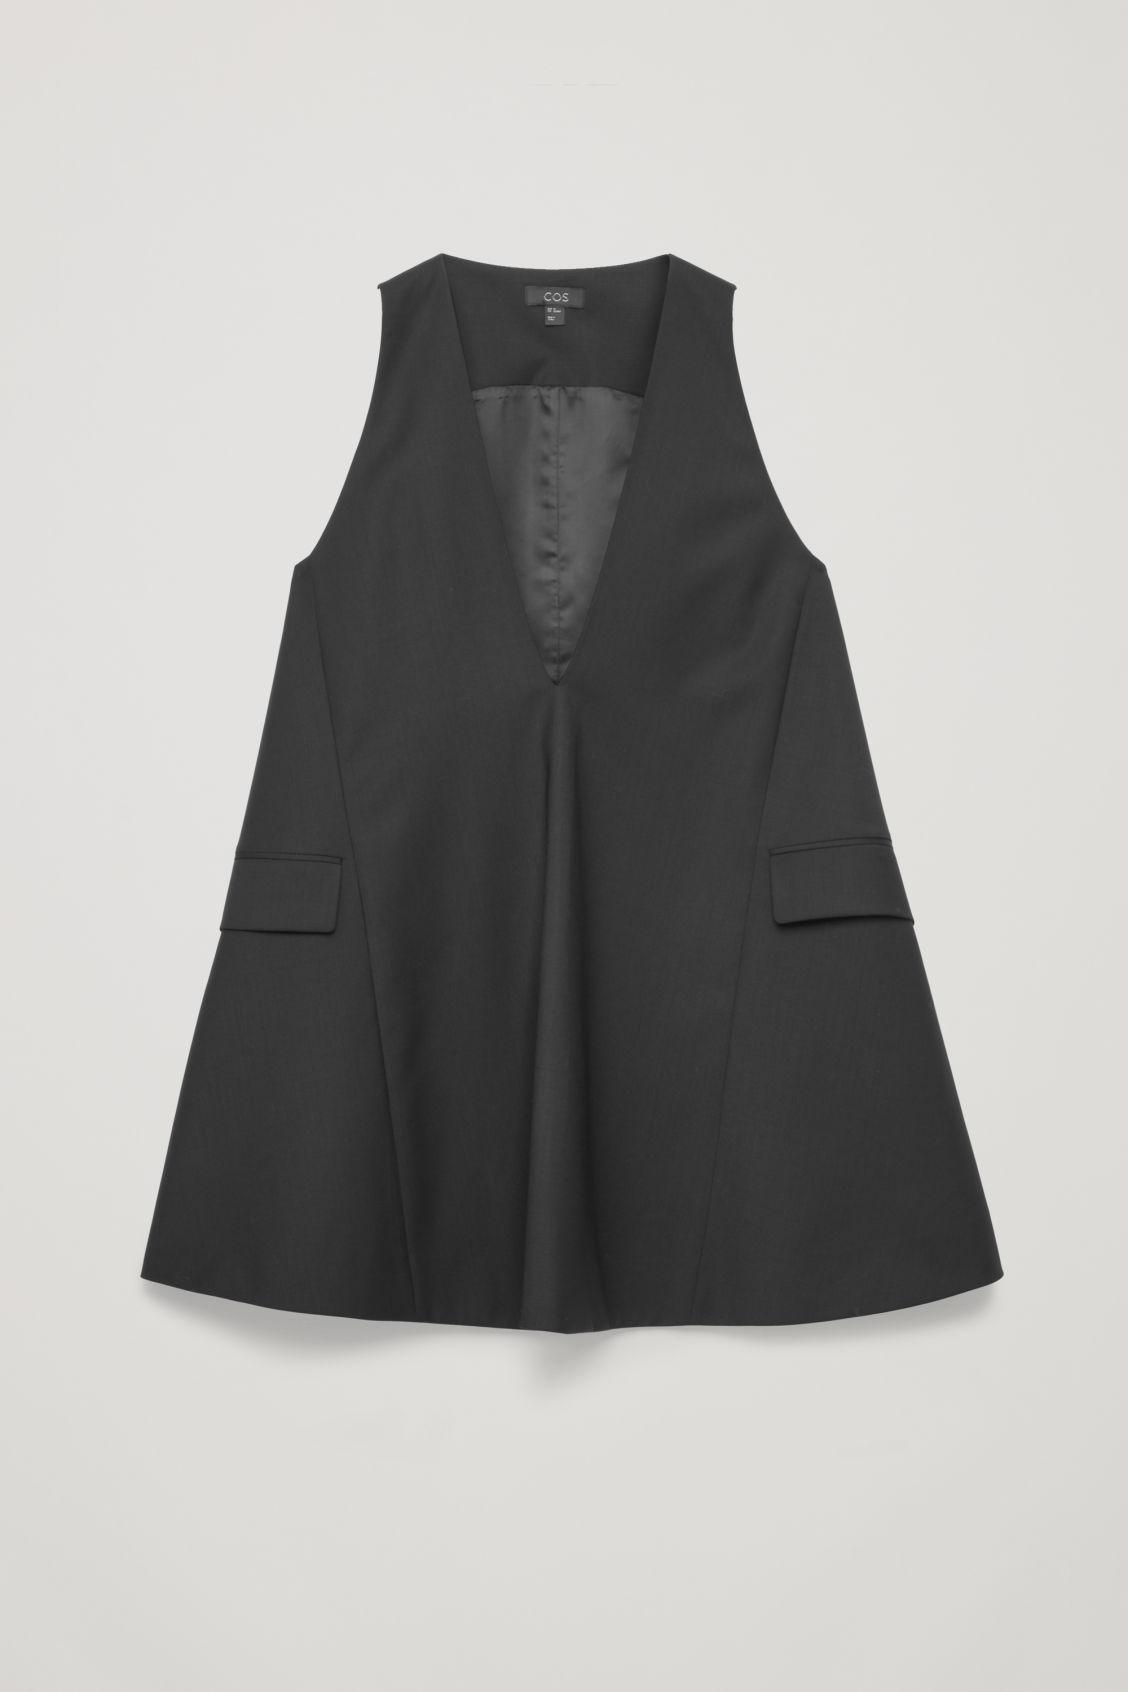 COS Tailored Wool A-line Dress in Black ...